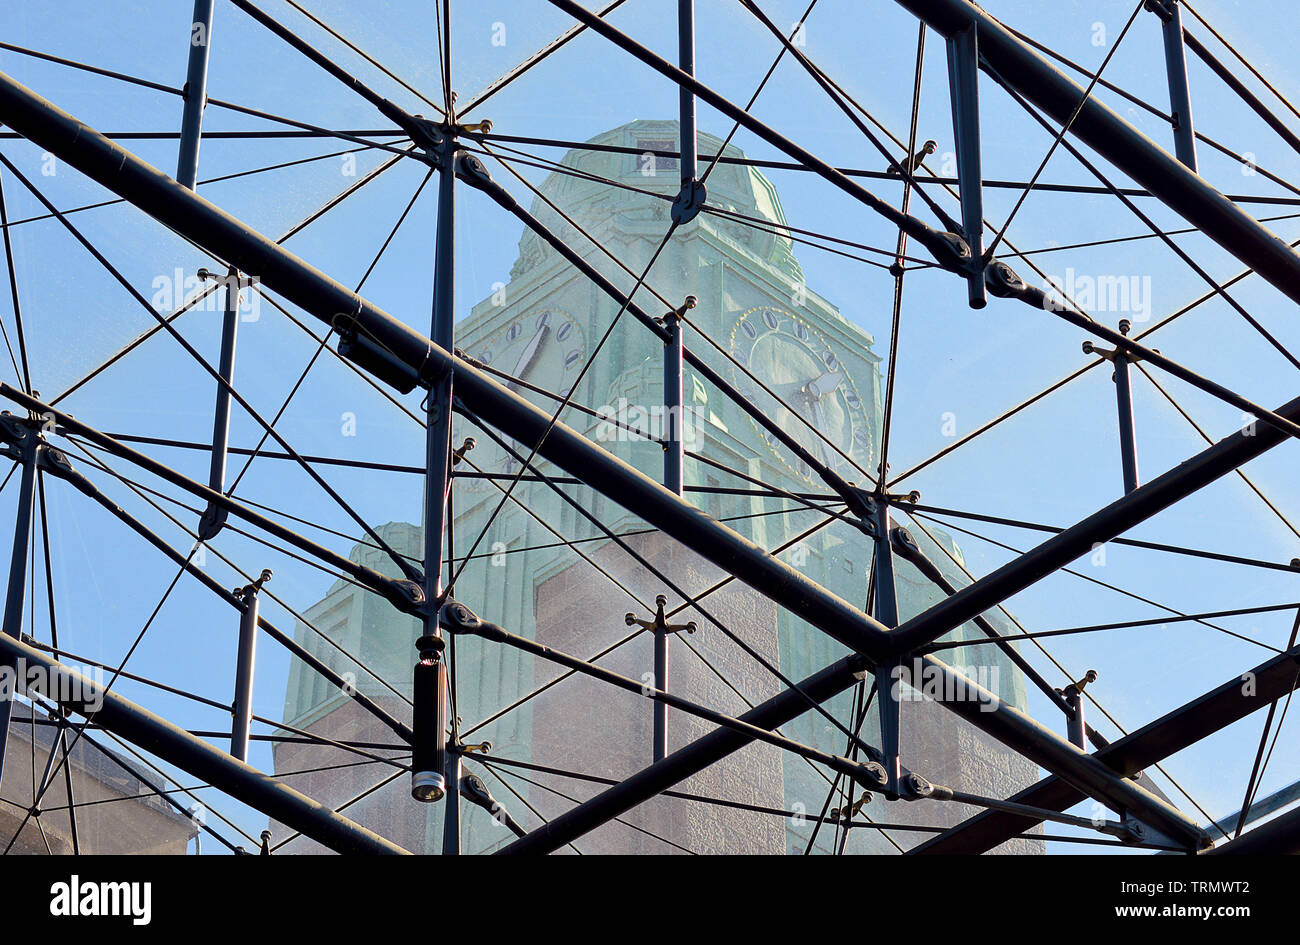 HELSINKI, FINLAND - 6 APRIL 2019: The copper-domed clock tower of Eliel Saarinen's Central Station seen through its glass roof. Stock Photo